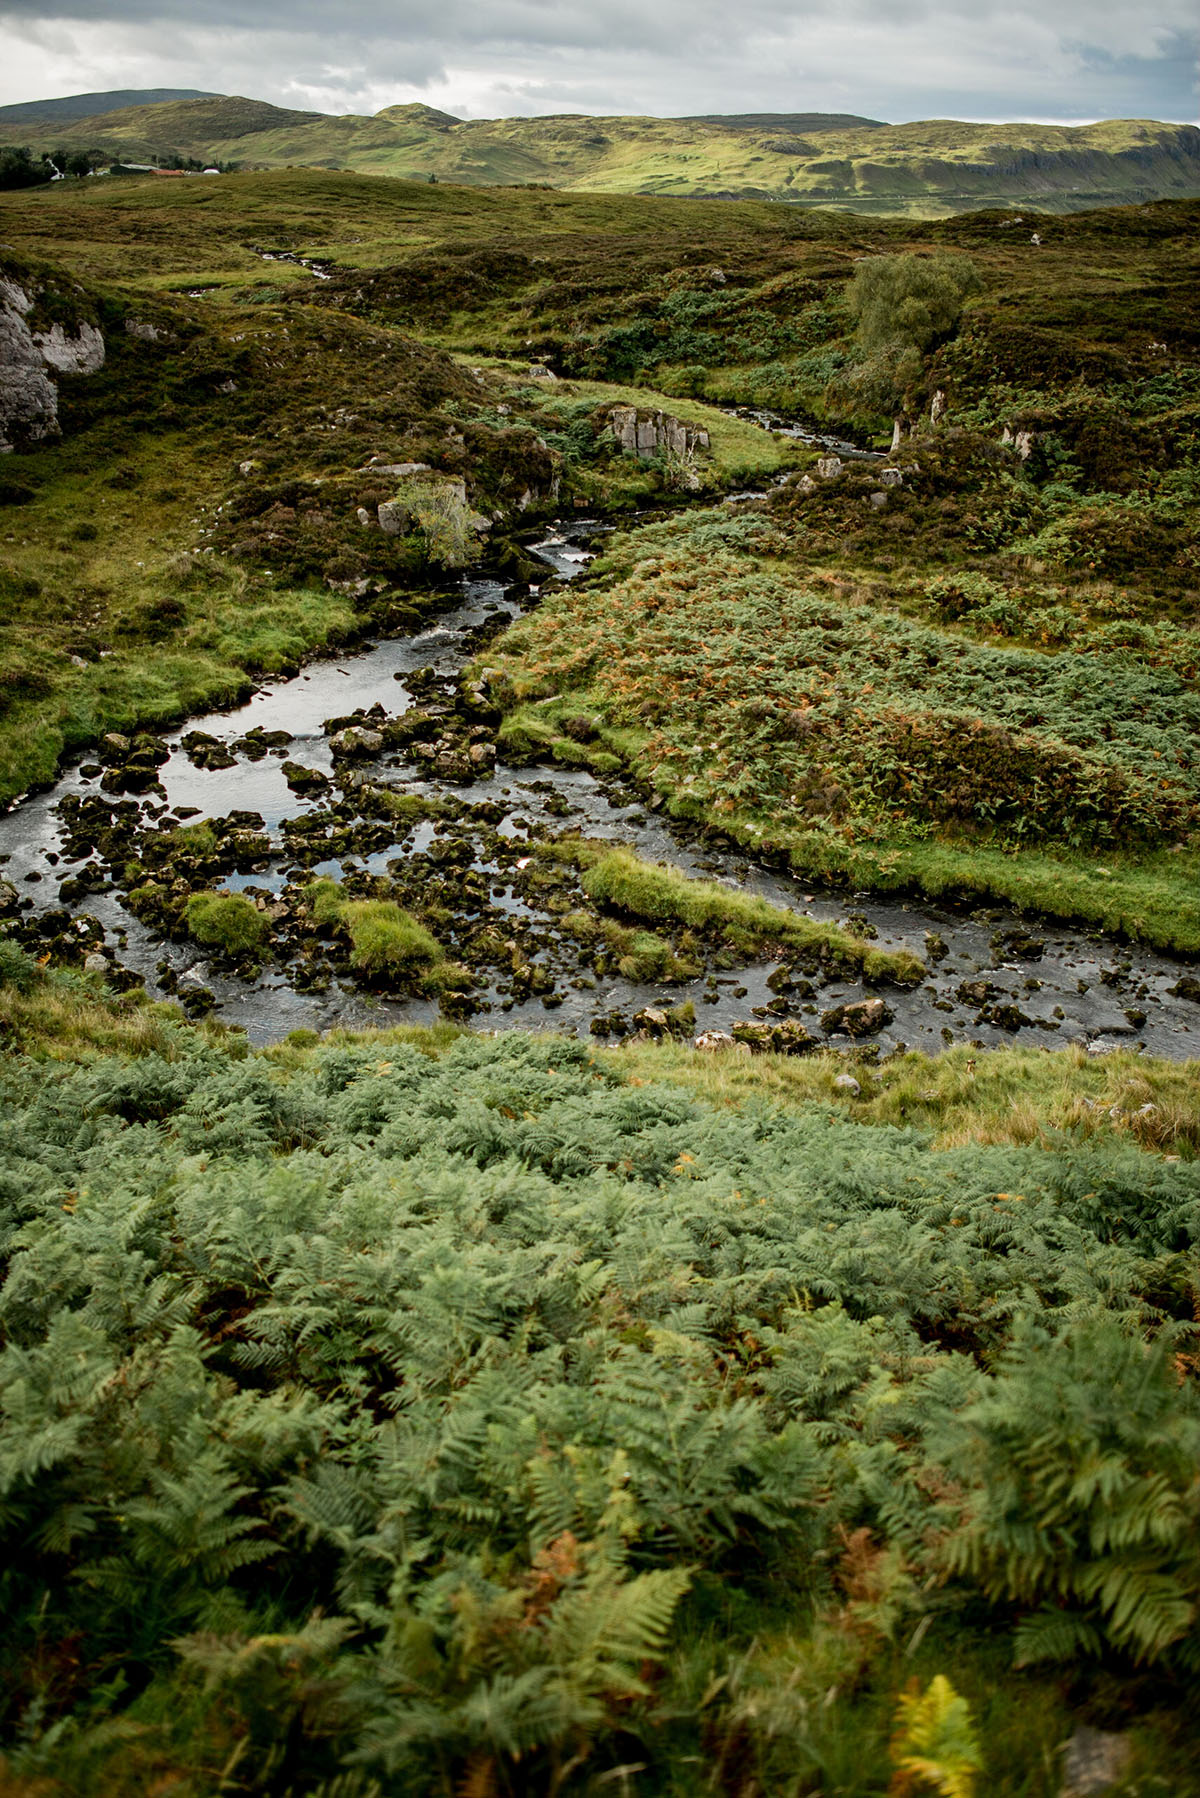 The Stream and its Fern